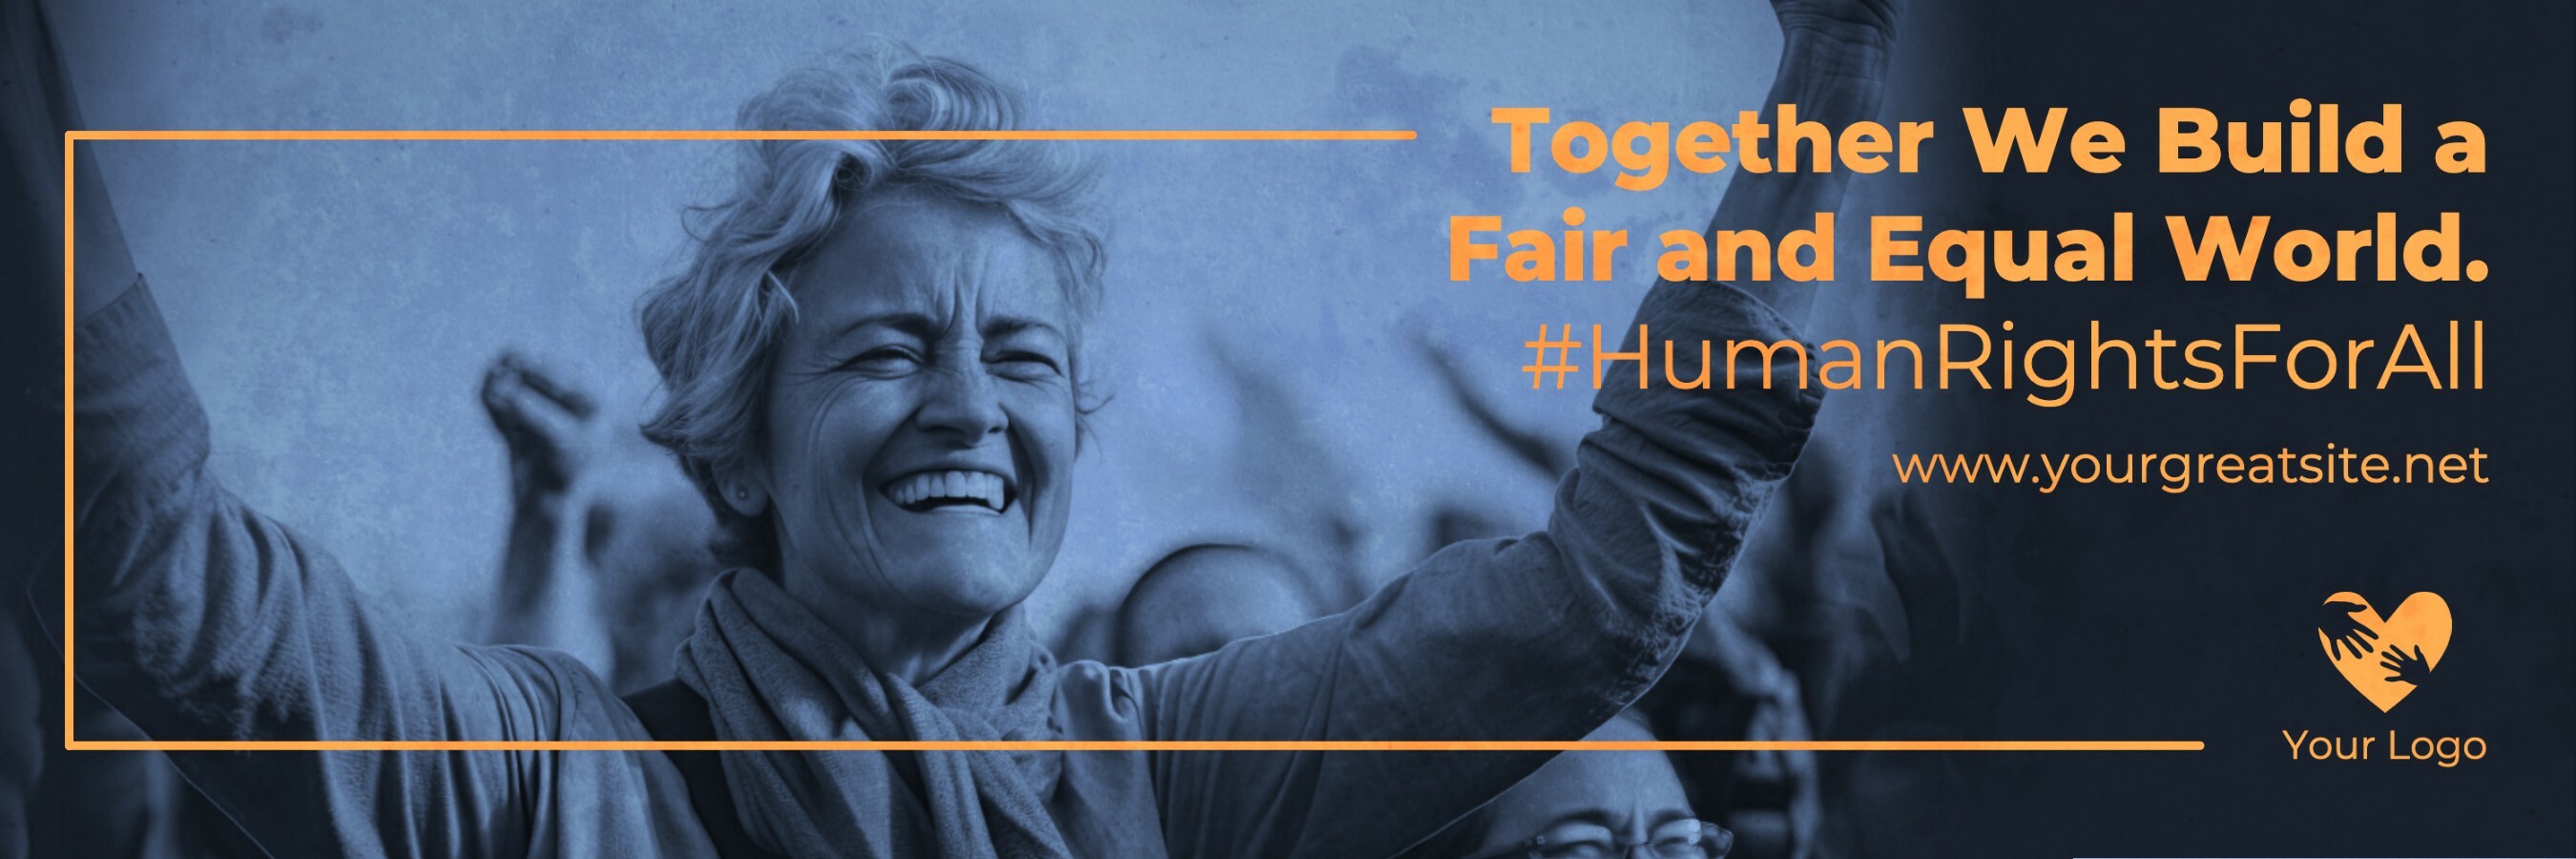 Activism Human Rights Twitter Banner